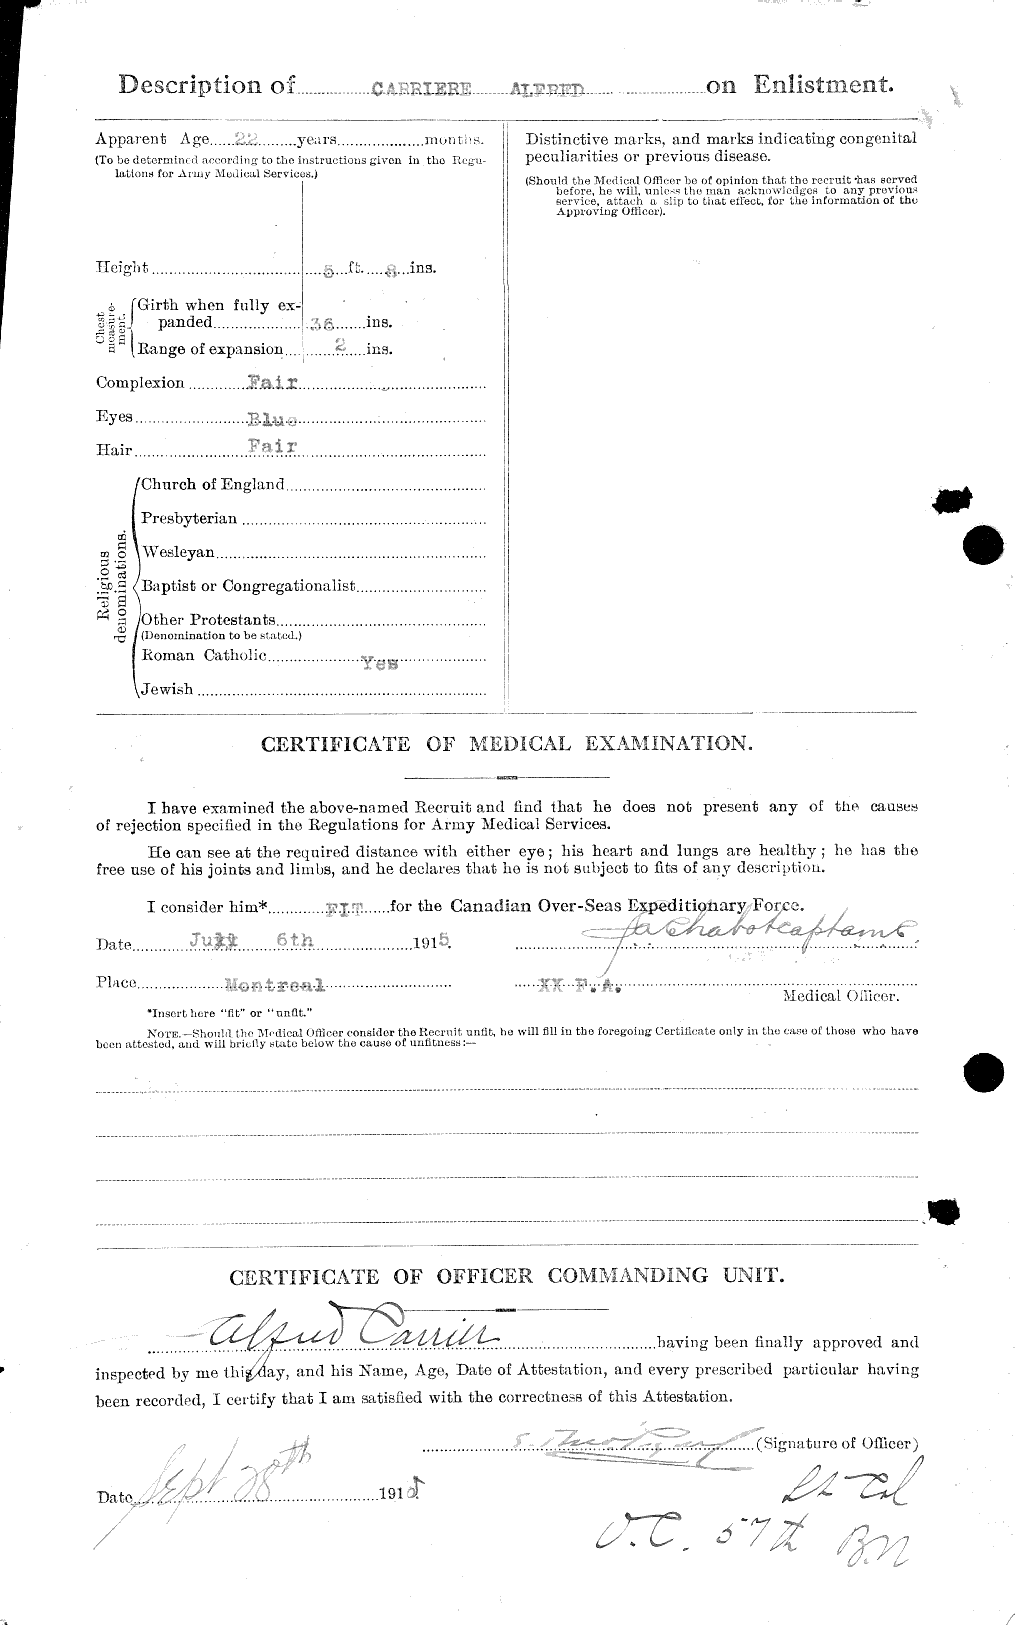 Personnel Records of the First World War - CEF 011344b